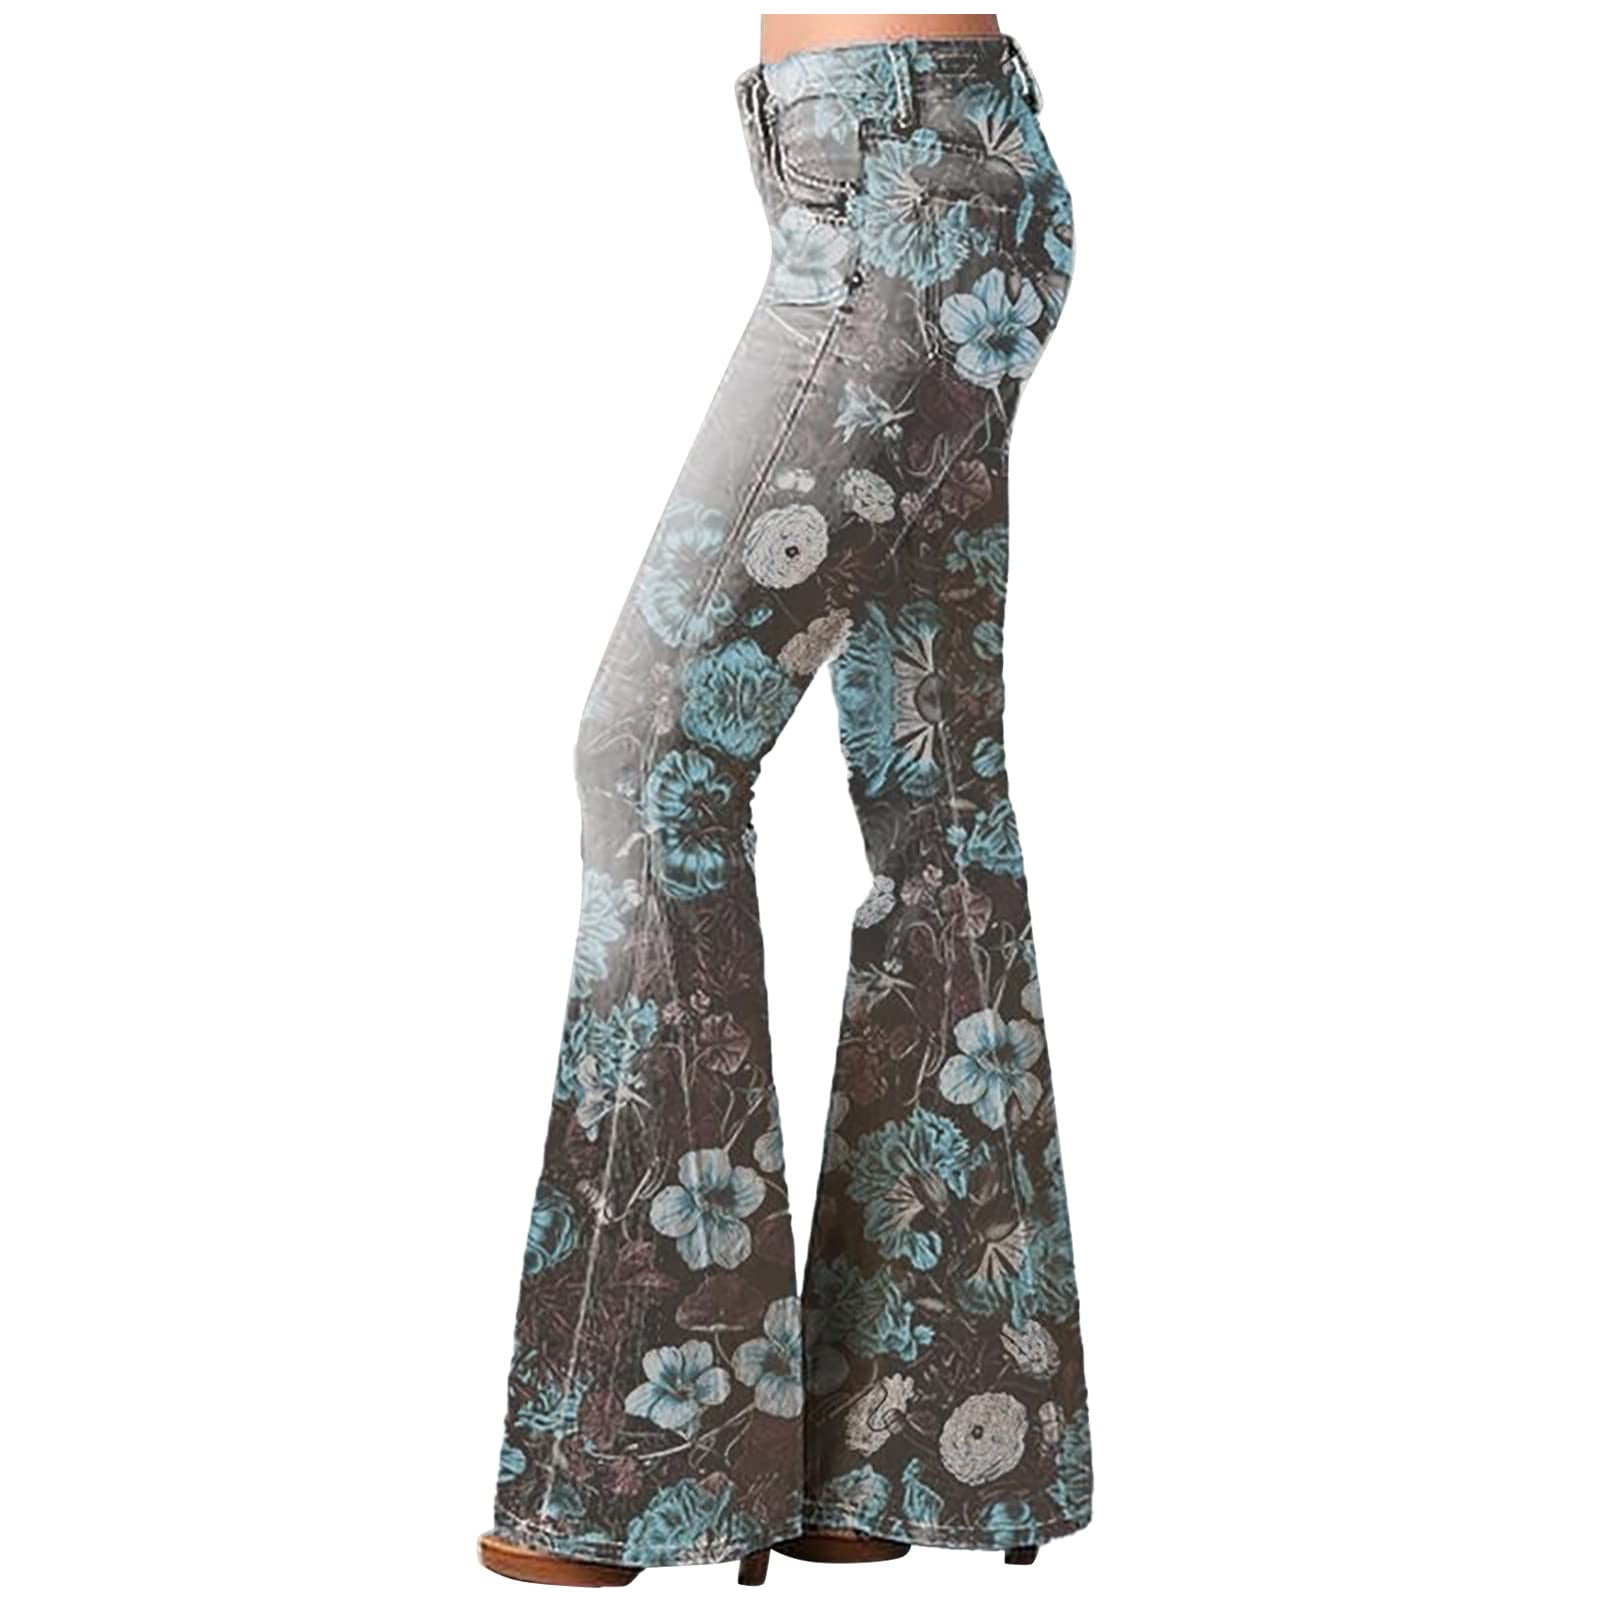 Bell Bottom Jeans for Women, Womens Vintage High Waisted Jeans Floral ...